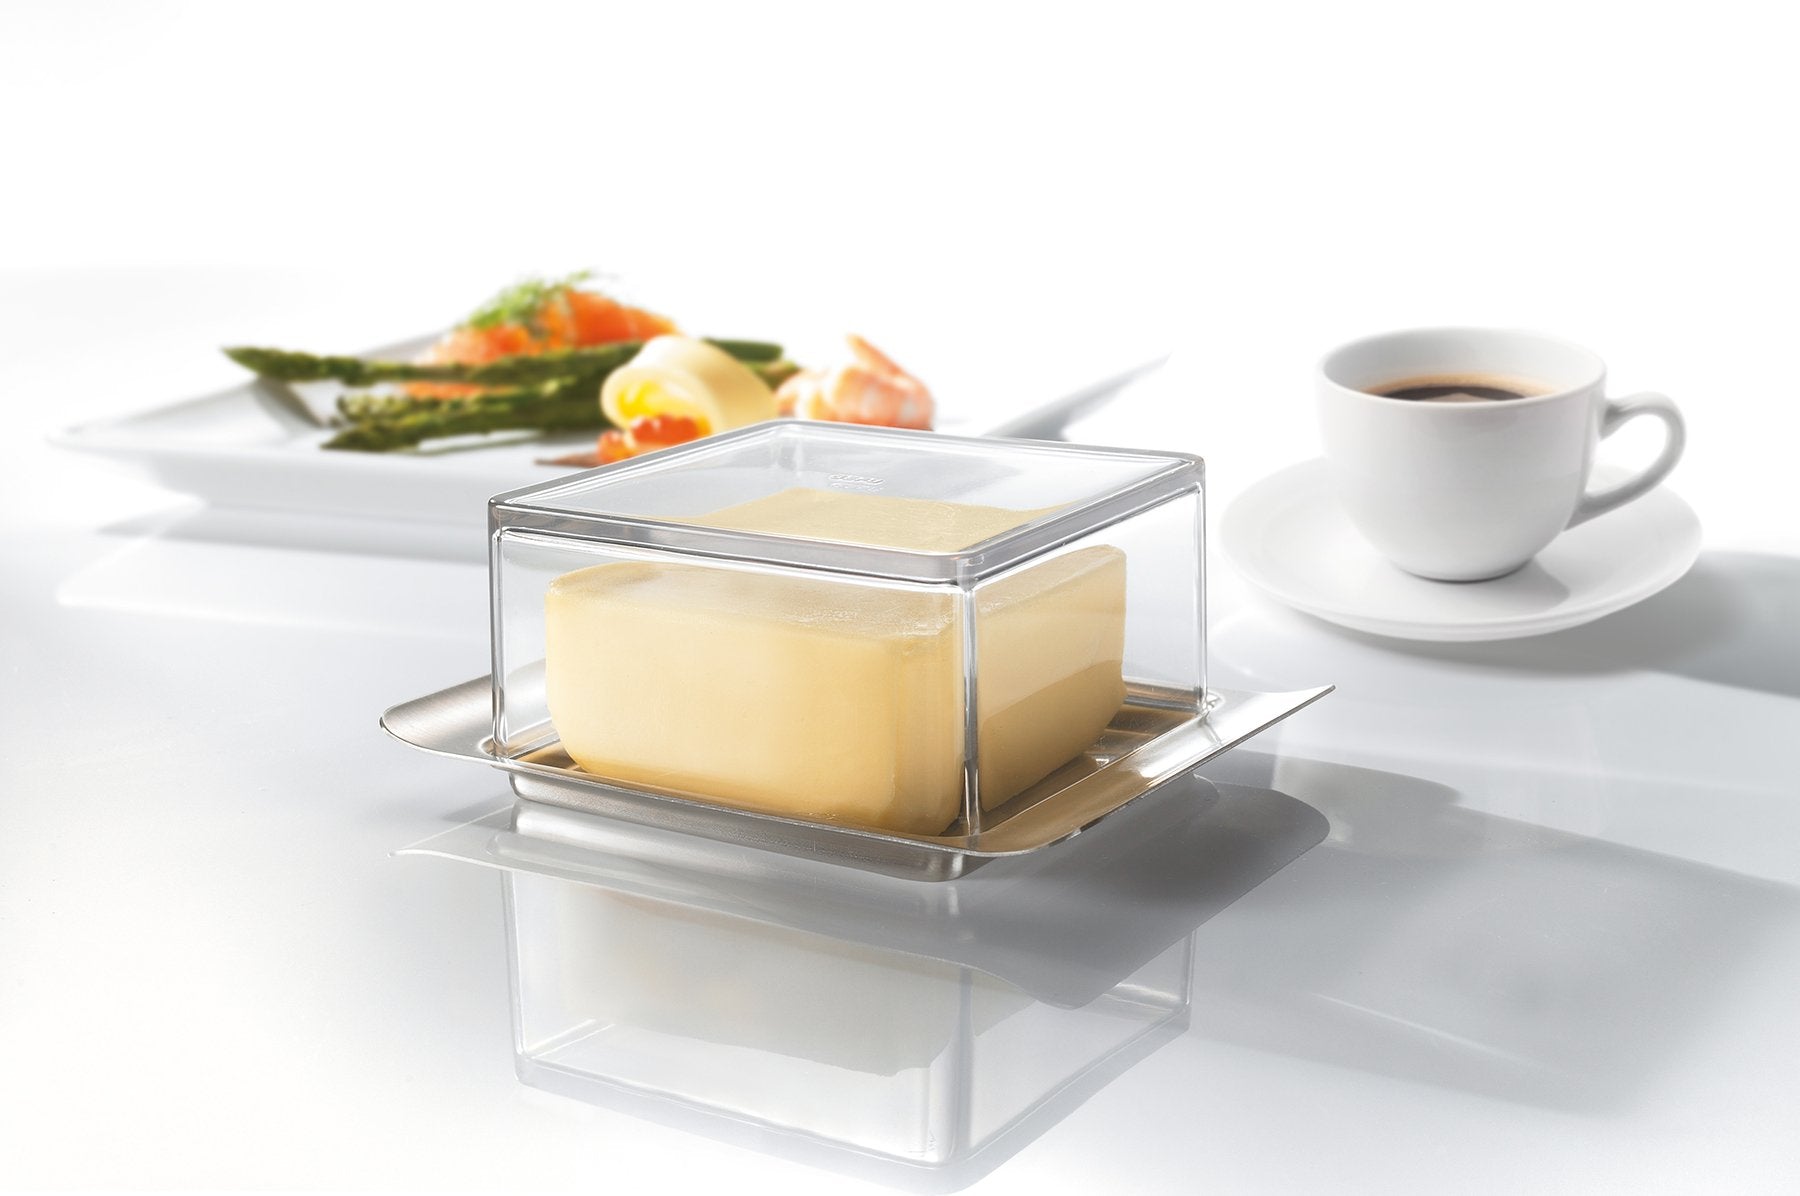 GEFU Butter Dish Brunch, 125 G - Whole and All